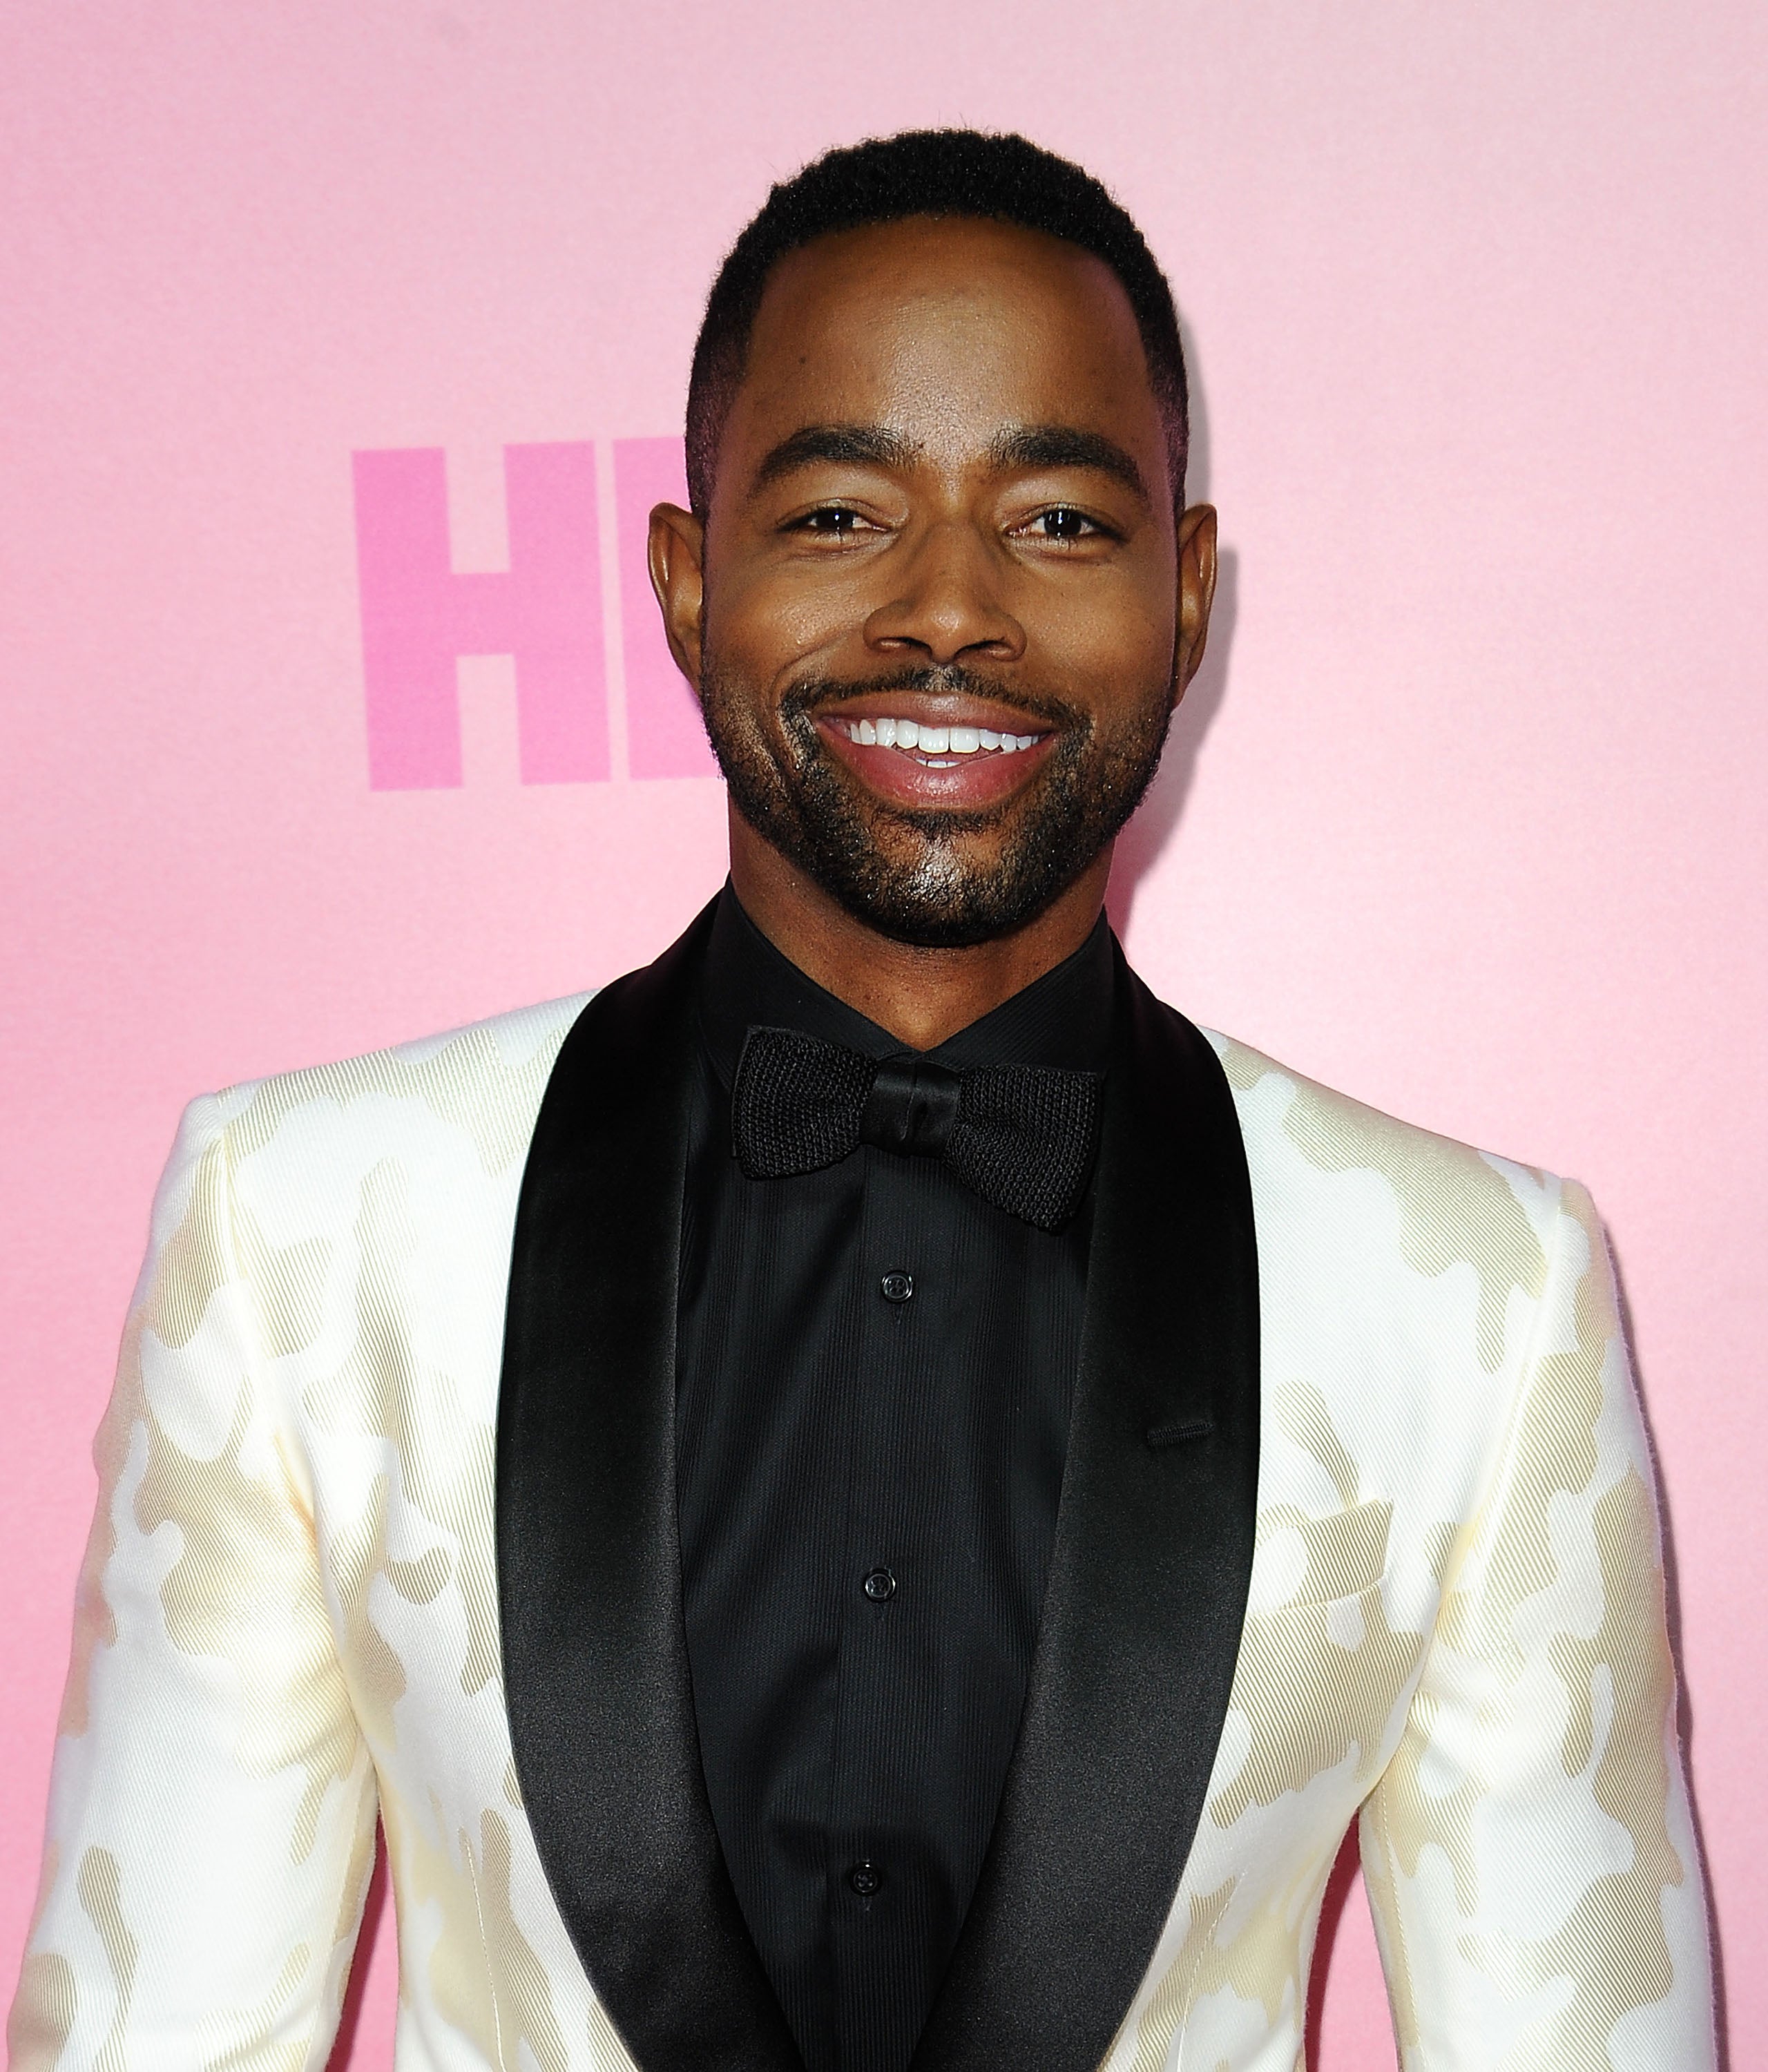 Lawrence May Be Cancelled, But These Photos Prove Jay Ellis Is Still Forever Bae